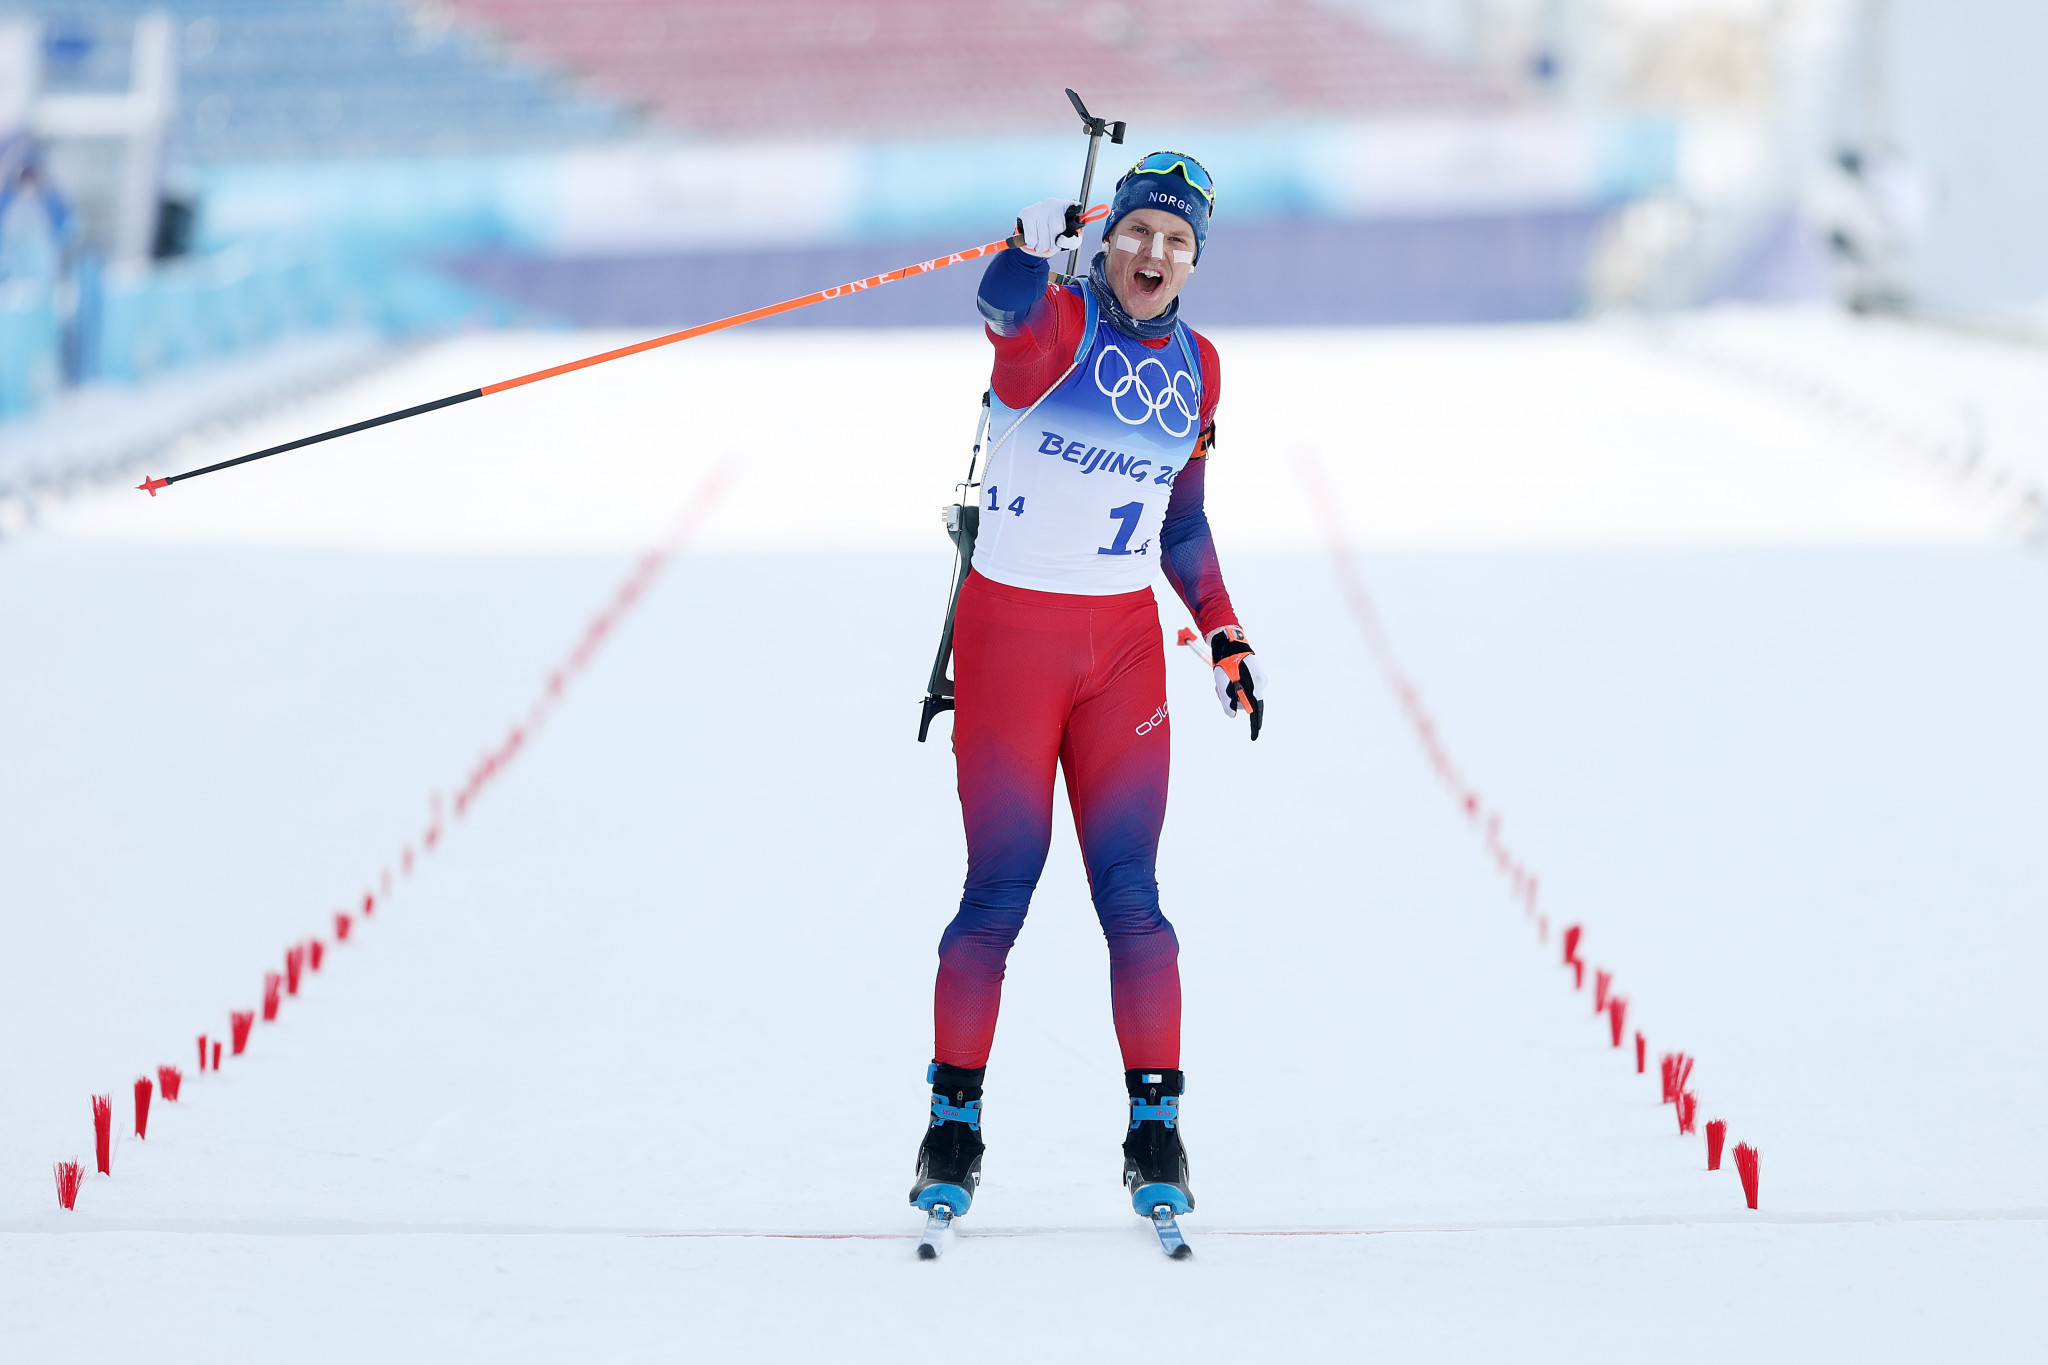 Vetle Sjaastad Christiansen celebrates as he crosses the finish line to secure gold for Norway ©Getty Images